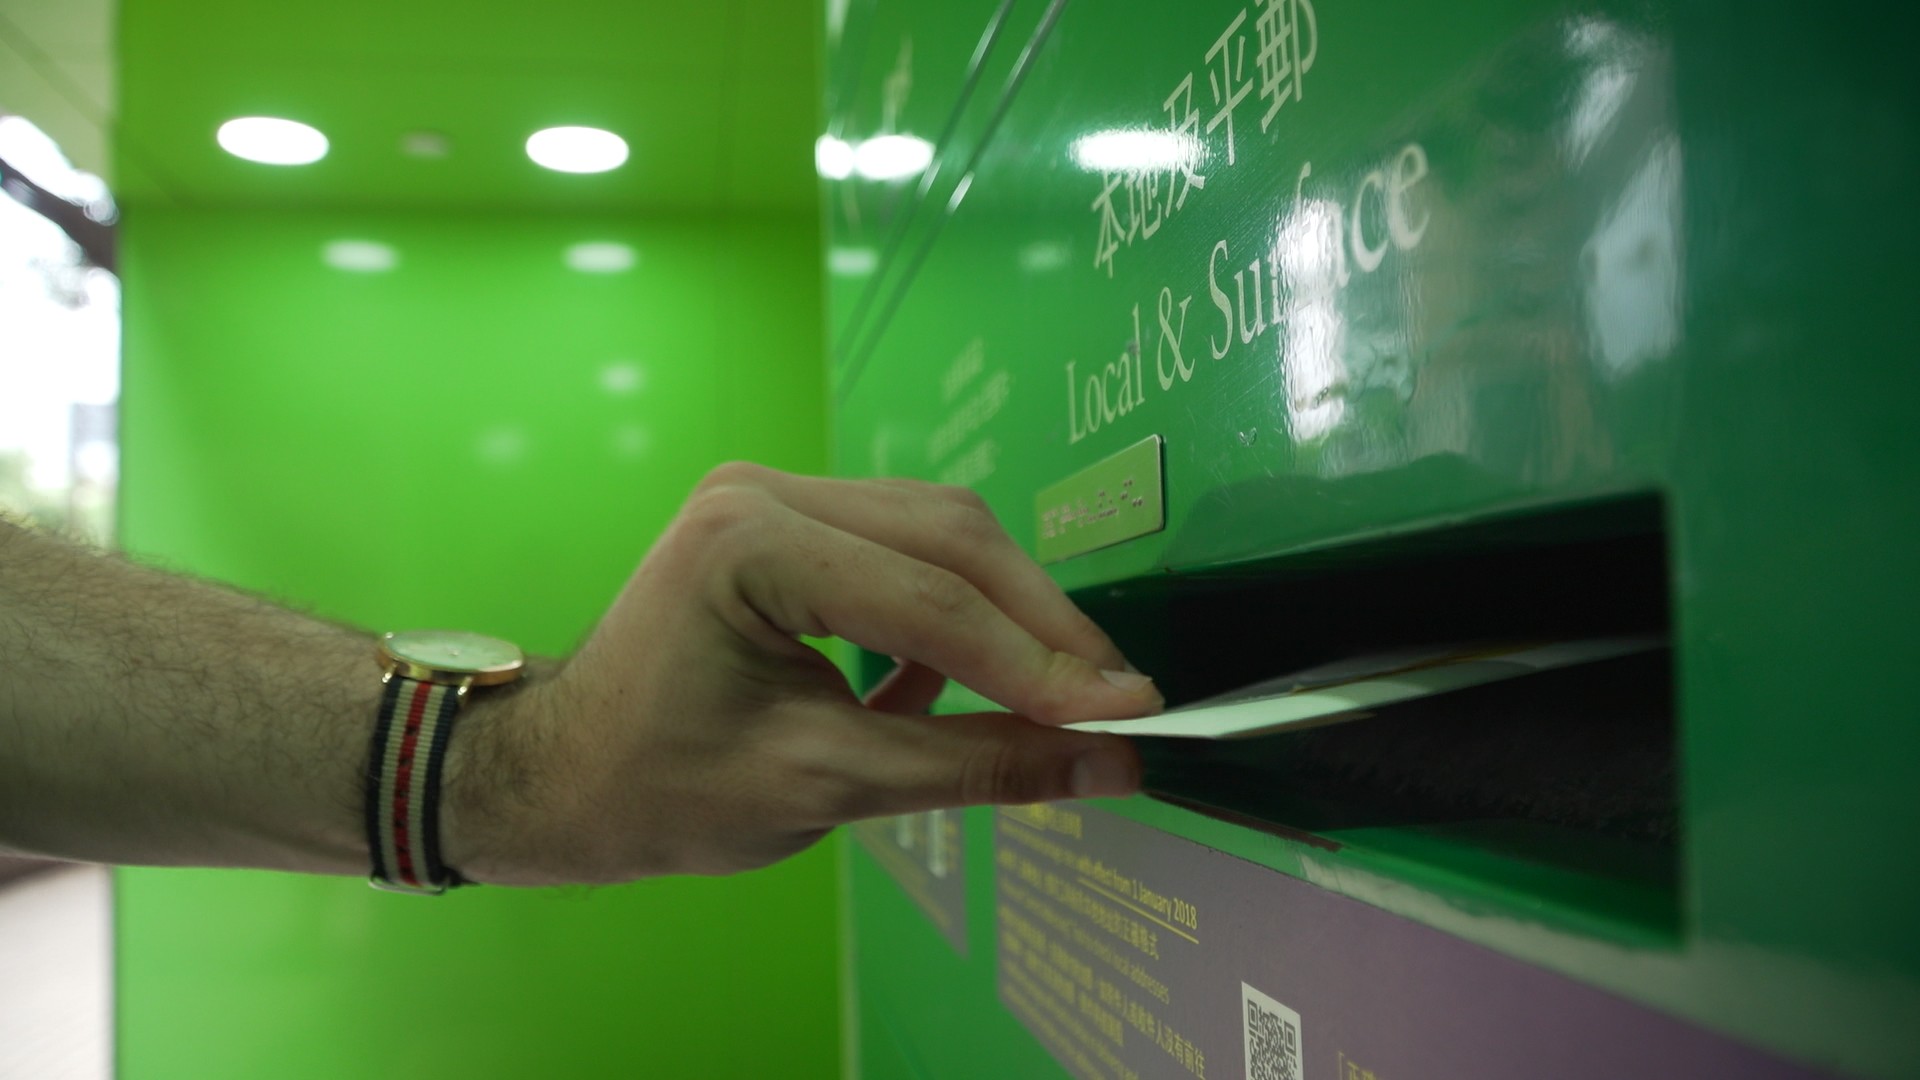 The city’s postal service handles an average of 3.35 million letters and parcels each day, making it far from obsolete in the age of email. We post a letter in Wan Chai and follow its journey to an address in the New Territories